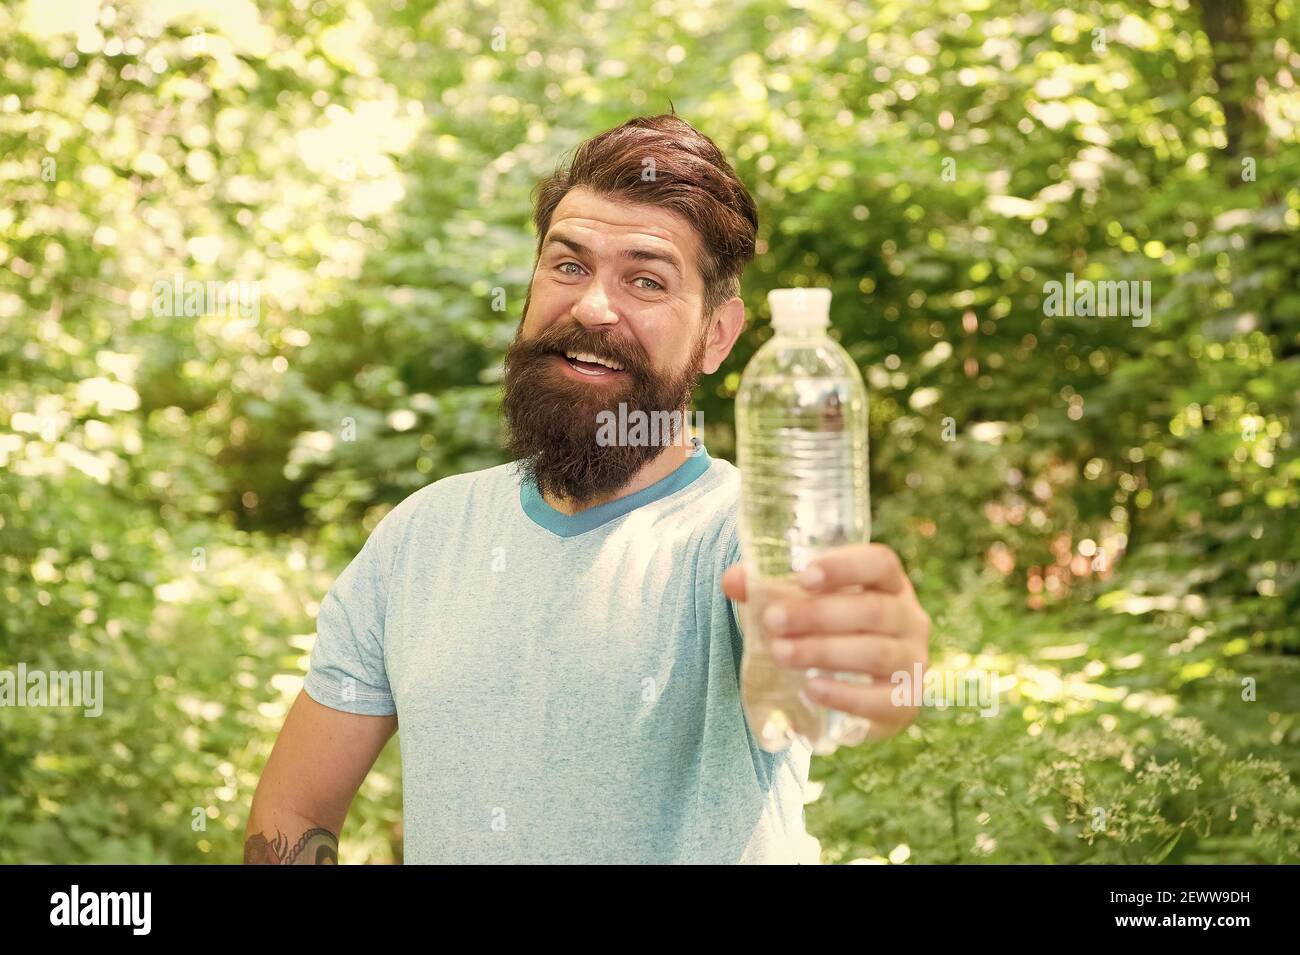 Drink Plenty Of Water. drinking water in forest outdoor with sunset nature on background. Bearded man with water bottle. fitness portrait of bearded man. happy mature guy. thirsty hipster traveler. Stock Photo